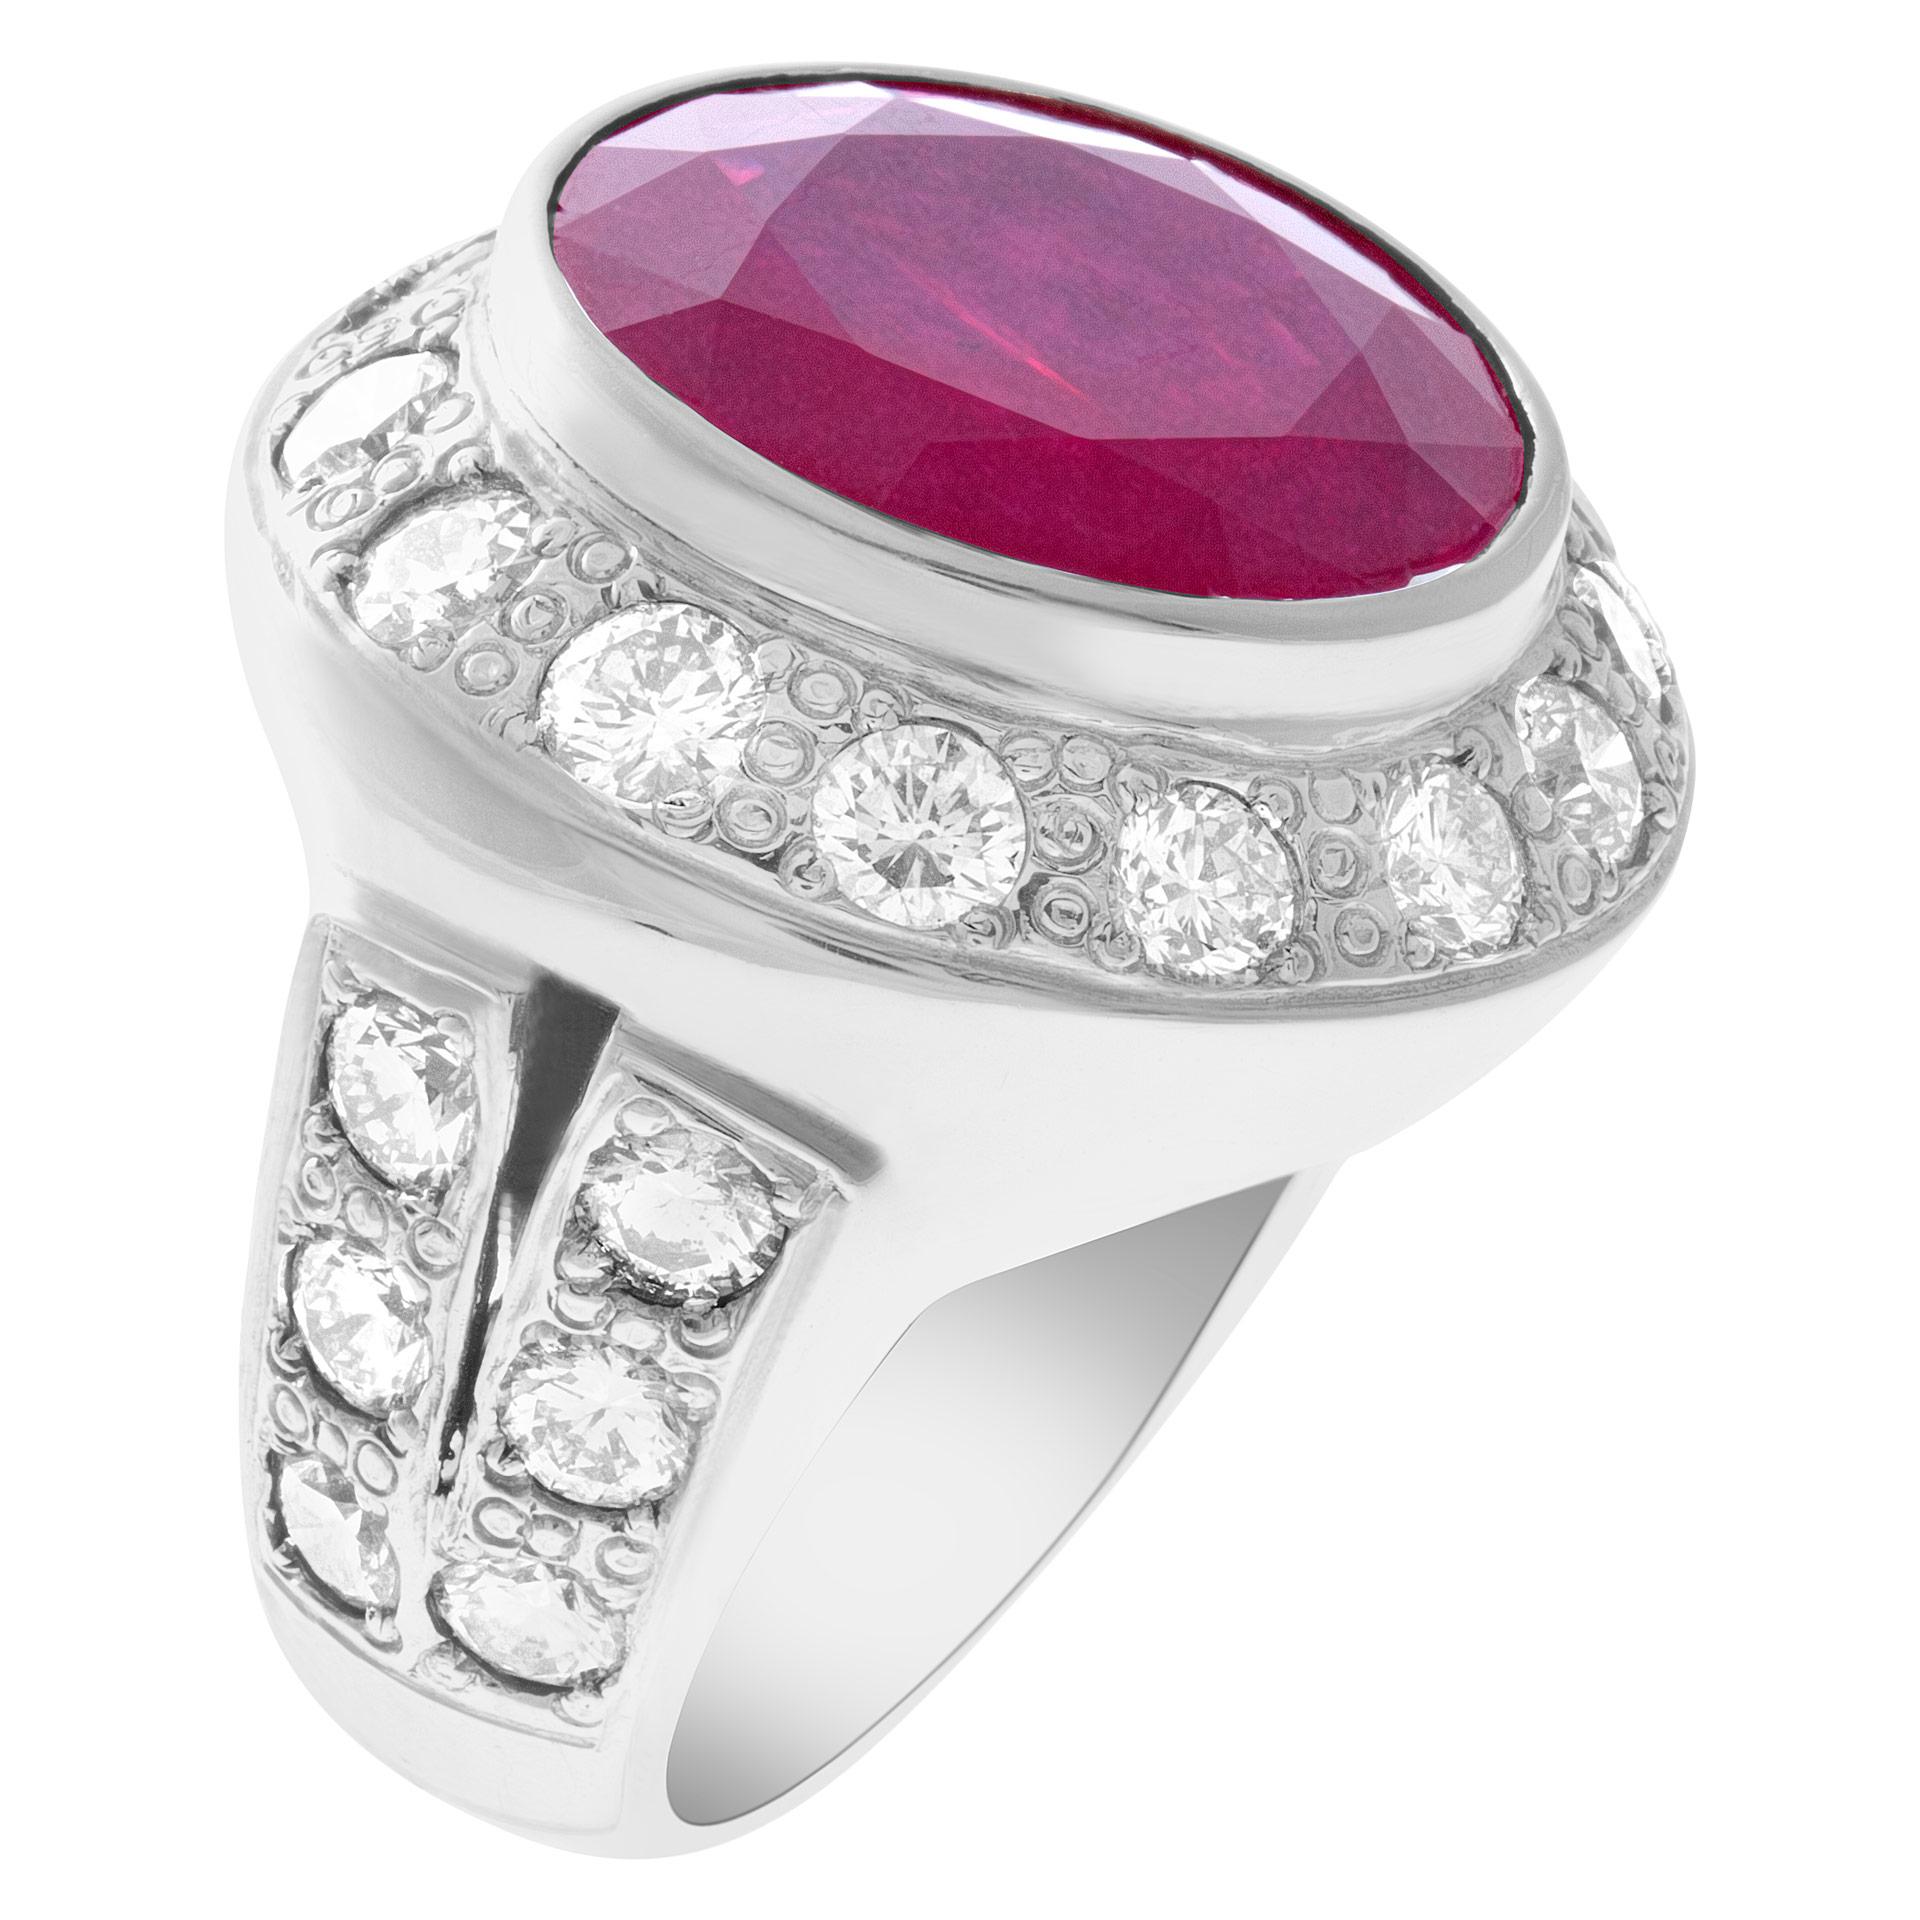 Large and colorful composite filled ruby and diamond ring in 18k white gold surrounded by approximately 5.20 carats round brilliant cut diamonds. Composite filled ruby is approx. 19.20 carats. Size 8.5 This Ruby ring is currently size 8.5 and some